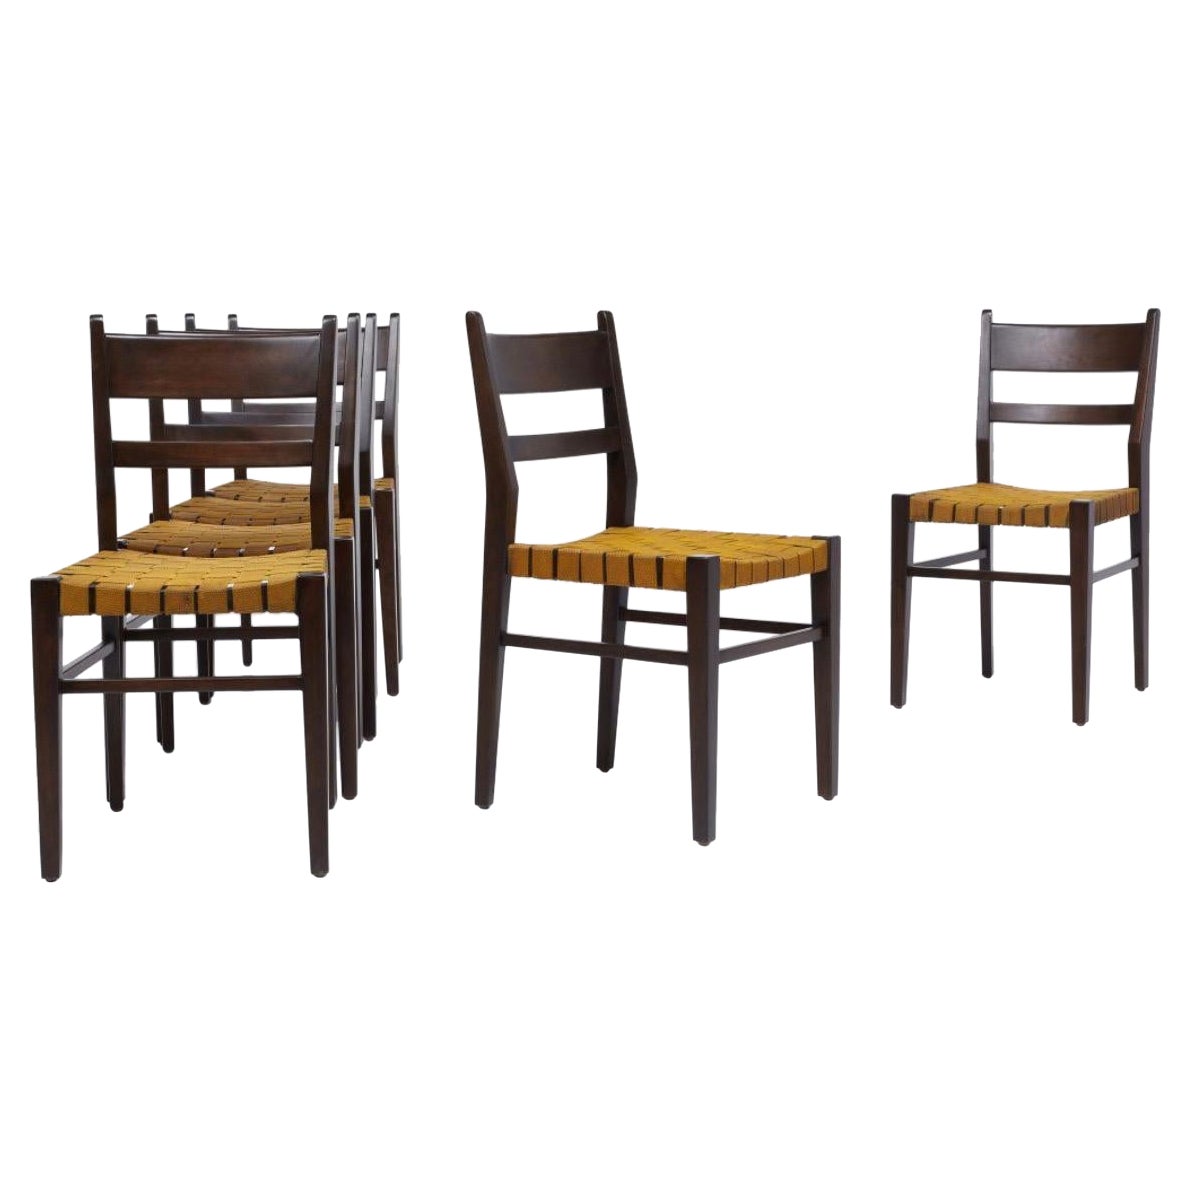 Edmond Spence Attributed 6 Mahogany Dining Chairs with Woven Seats, 1940s